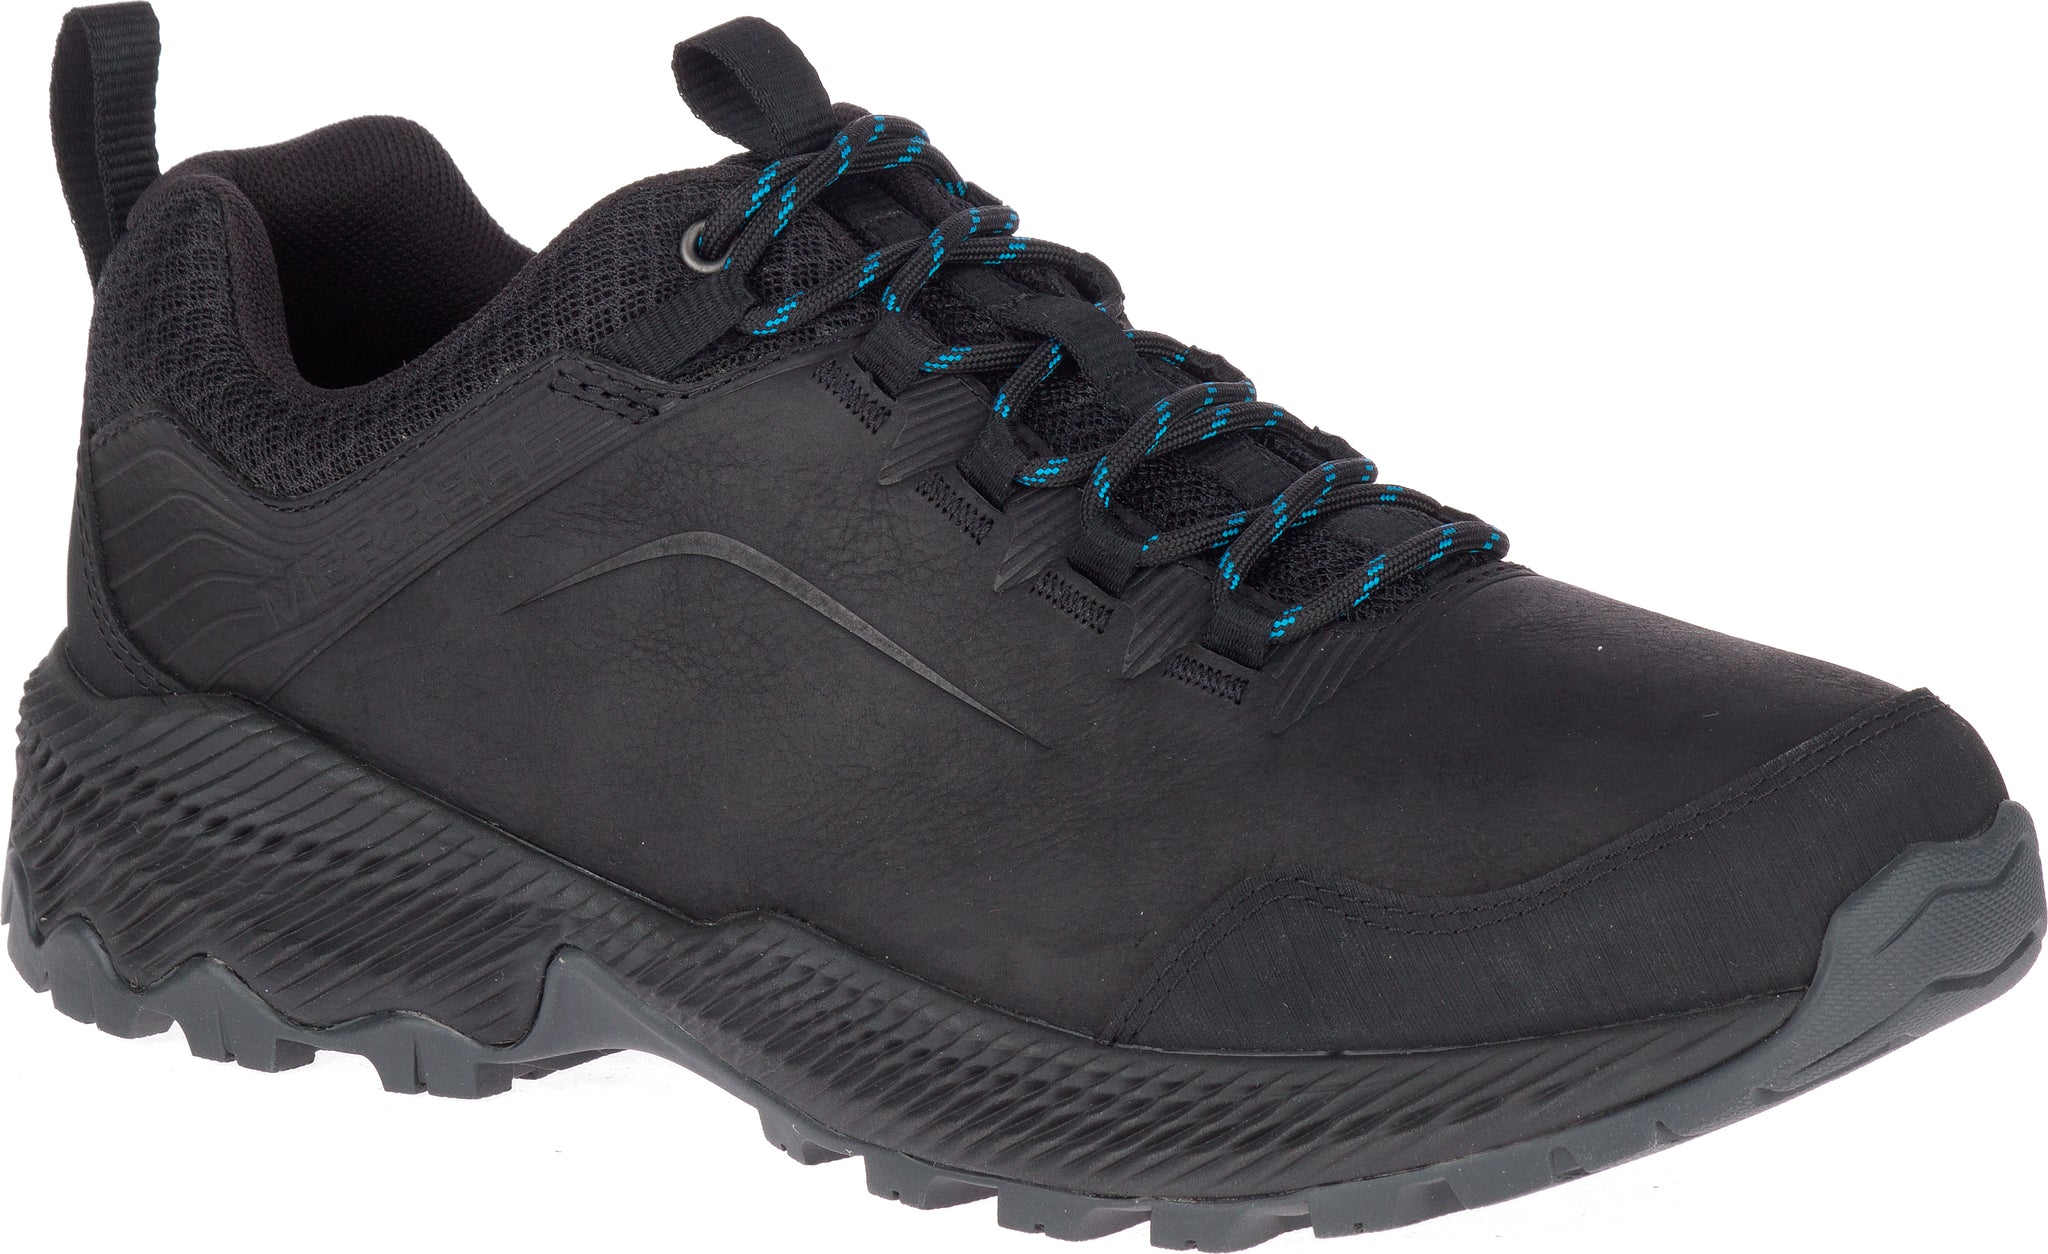 Merrell Forestbound Shoes - Men's | Altitude Sports